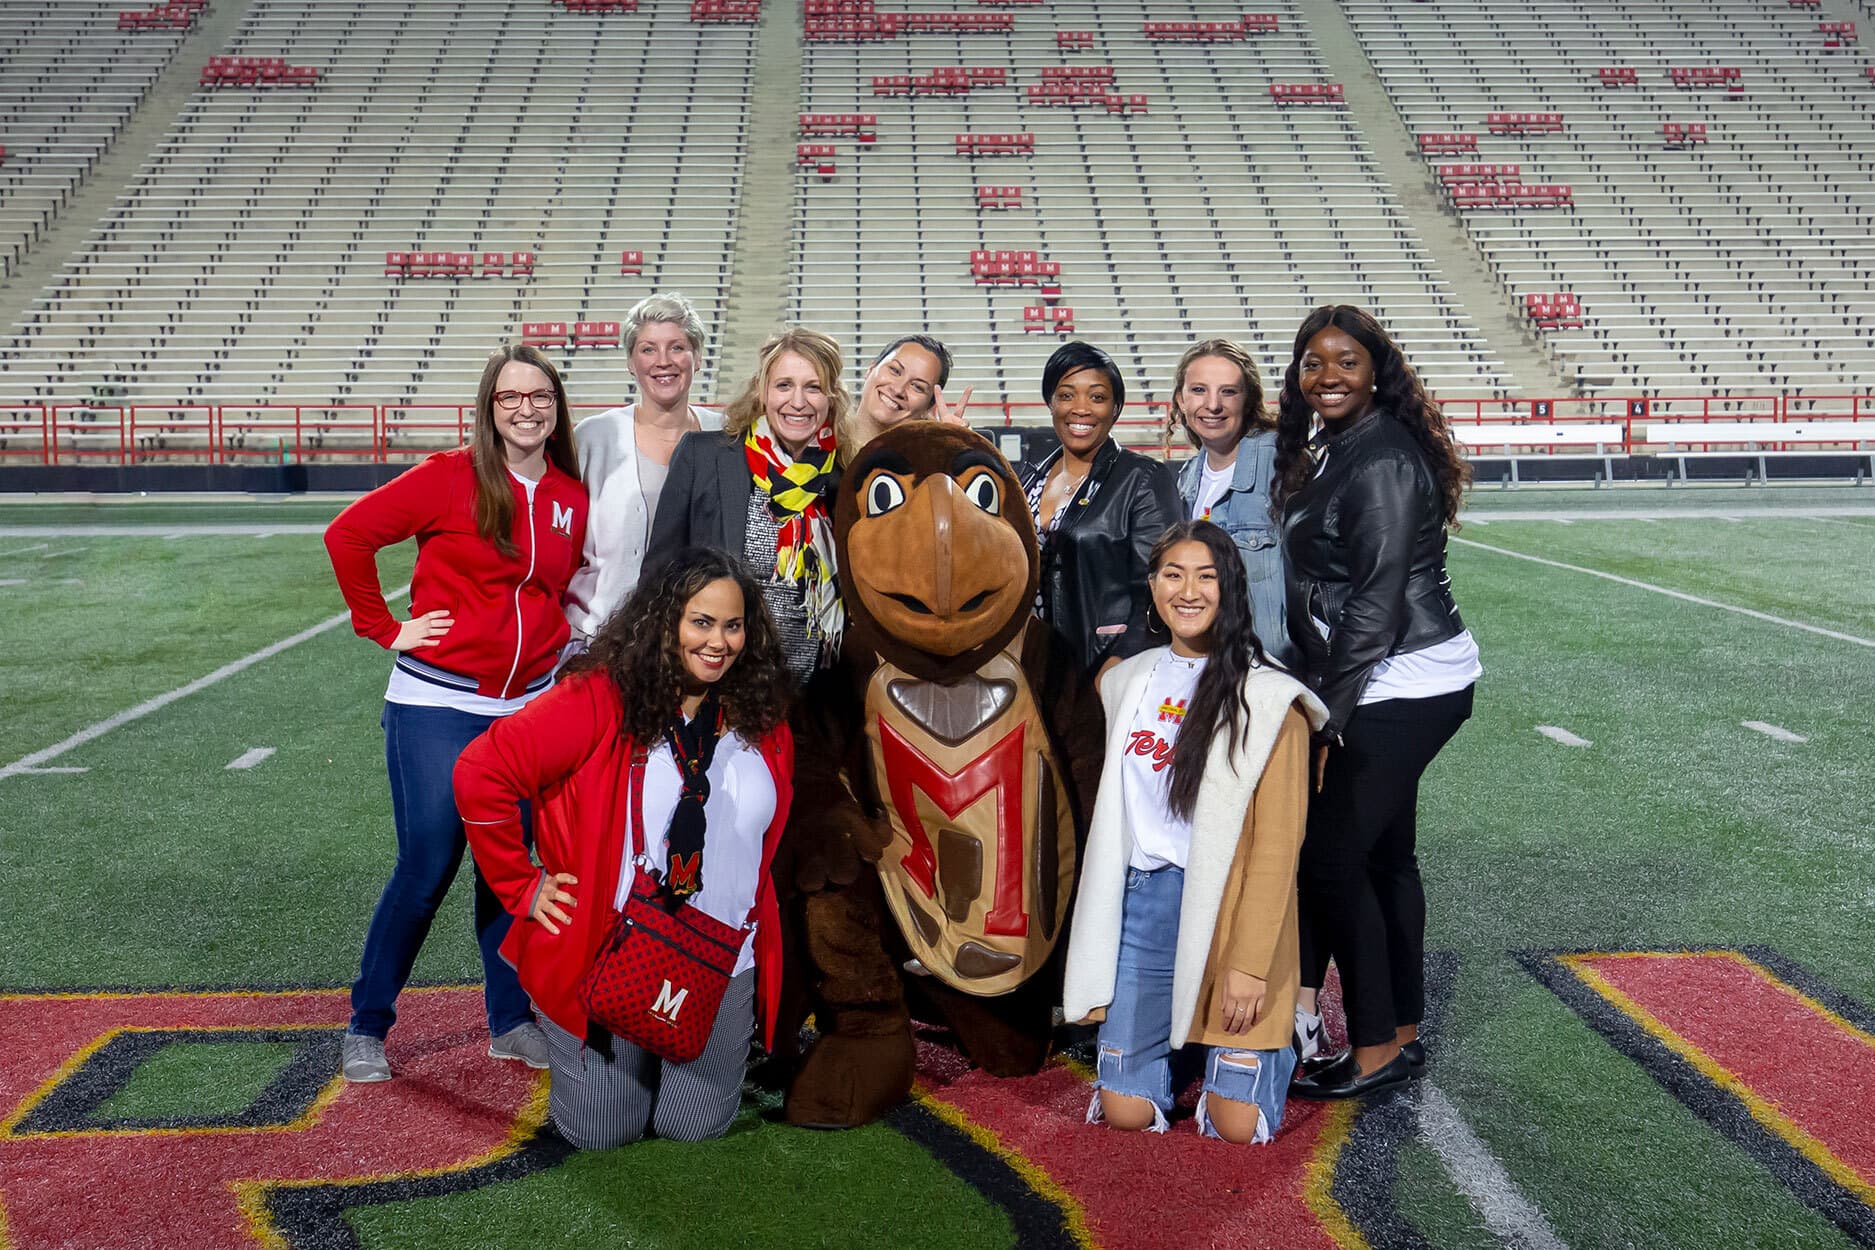 Members of the UMD Office of Marketing and Communications take a group photo with Testudo the mascot in the middle